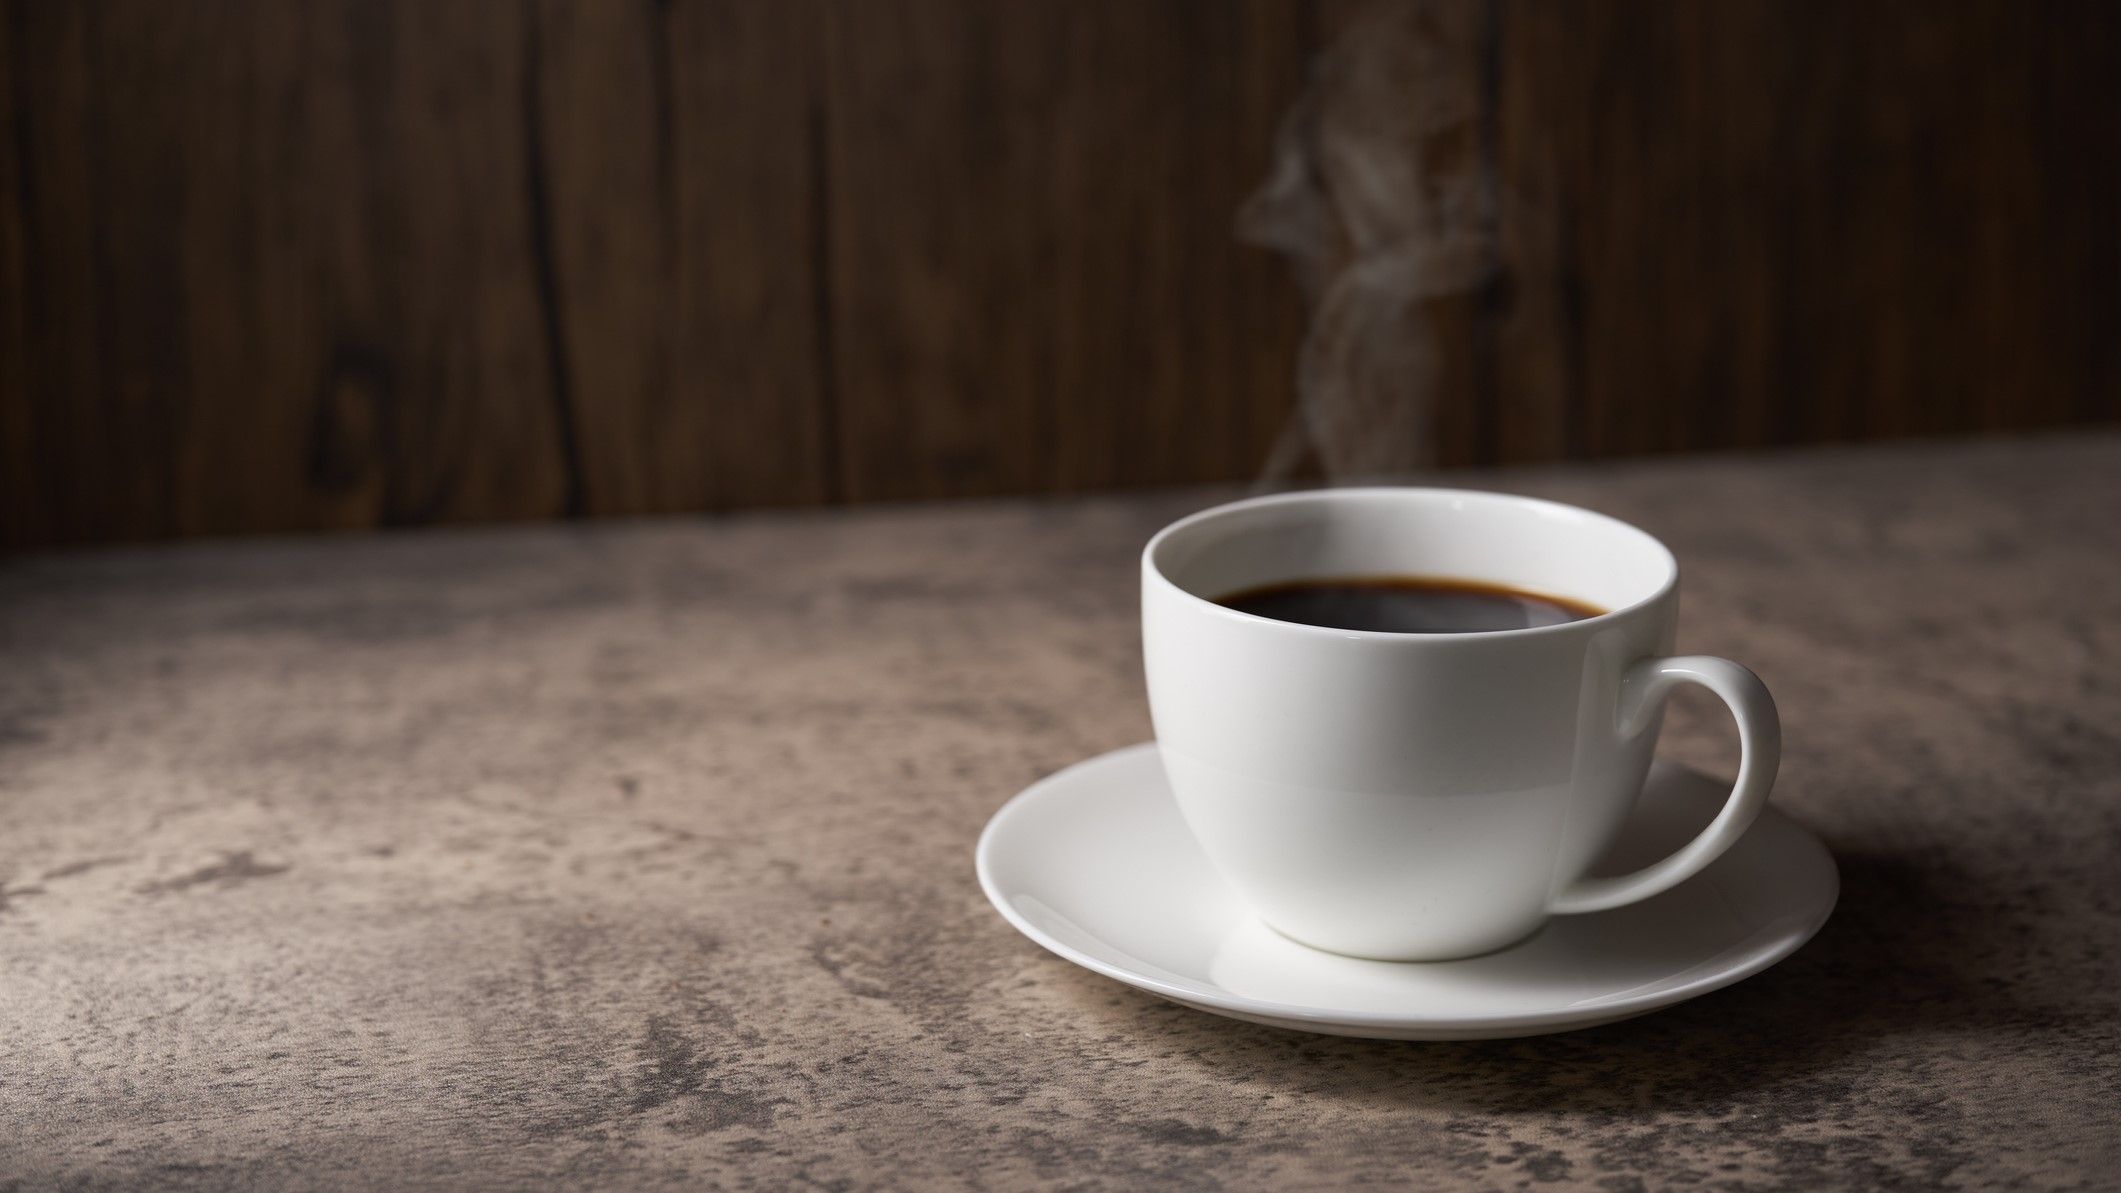 Data suggests that just one daily cup of black coffee could diminish the risk of chronic liver disease by as much as 15 per cent.